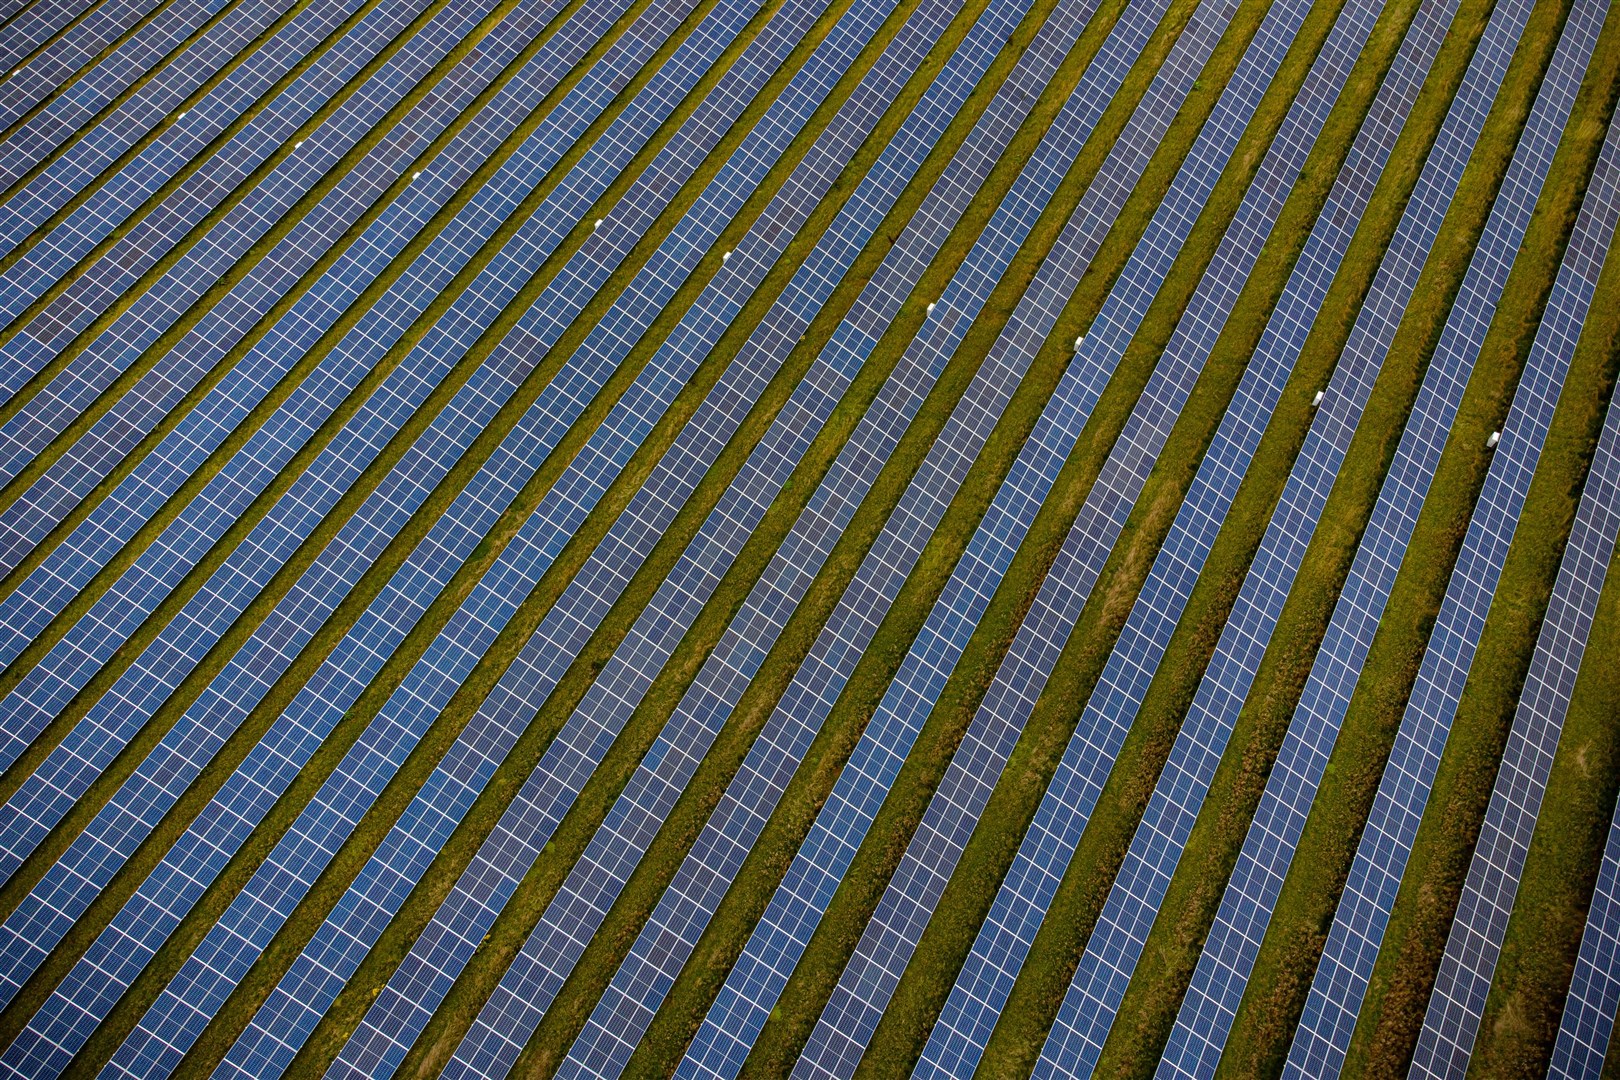 Other renewables companies, such as solar farm builders, can also bid for the contracts (Ben Birchall/PA)